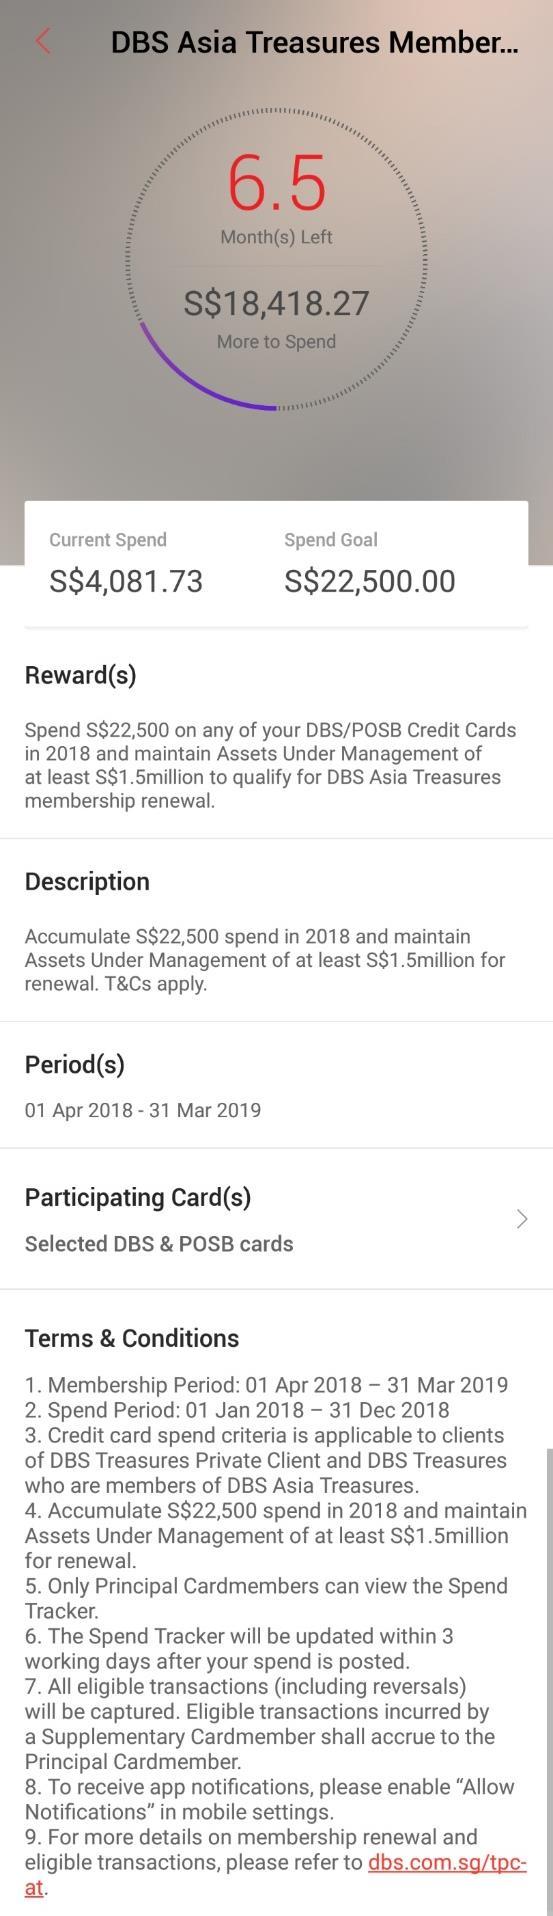 (d) Tap on the Spend Tracker to find out more